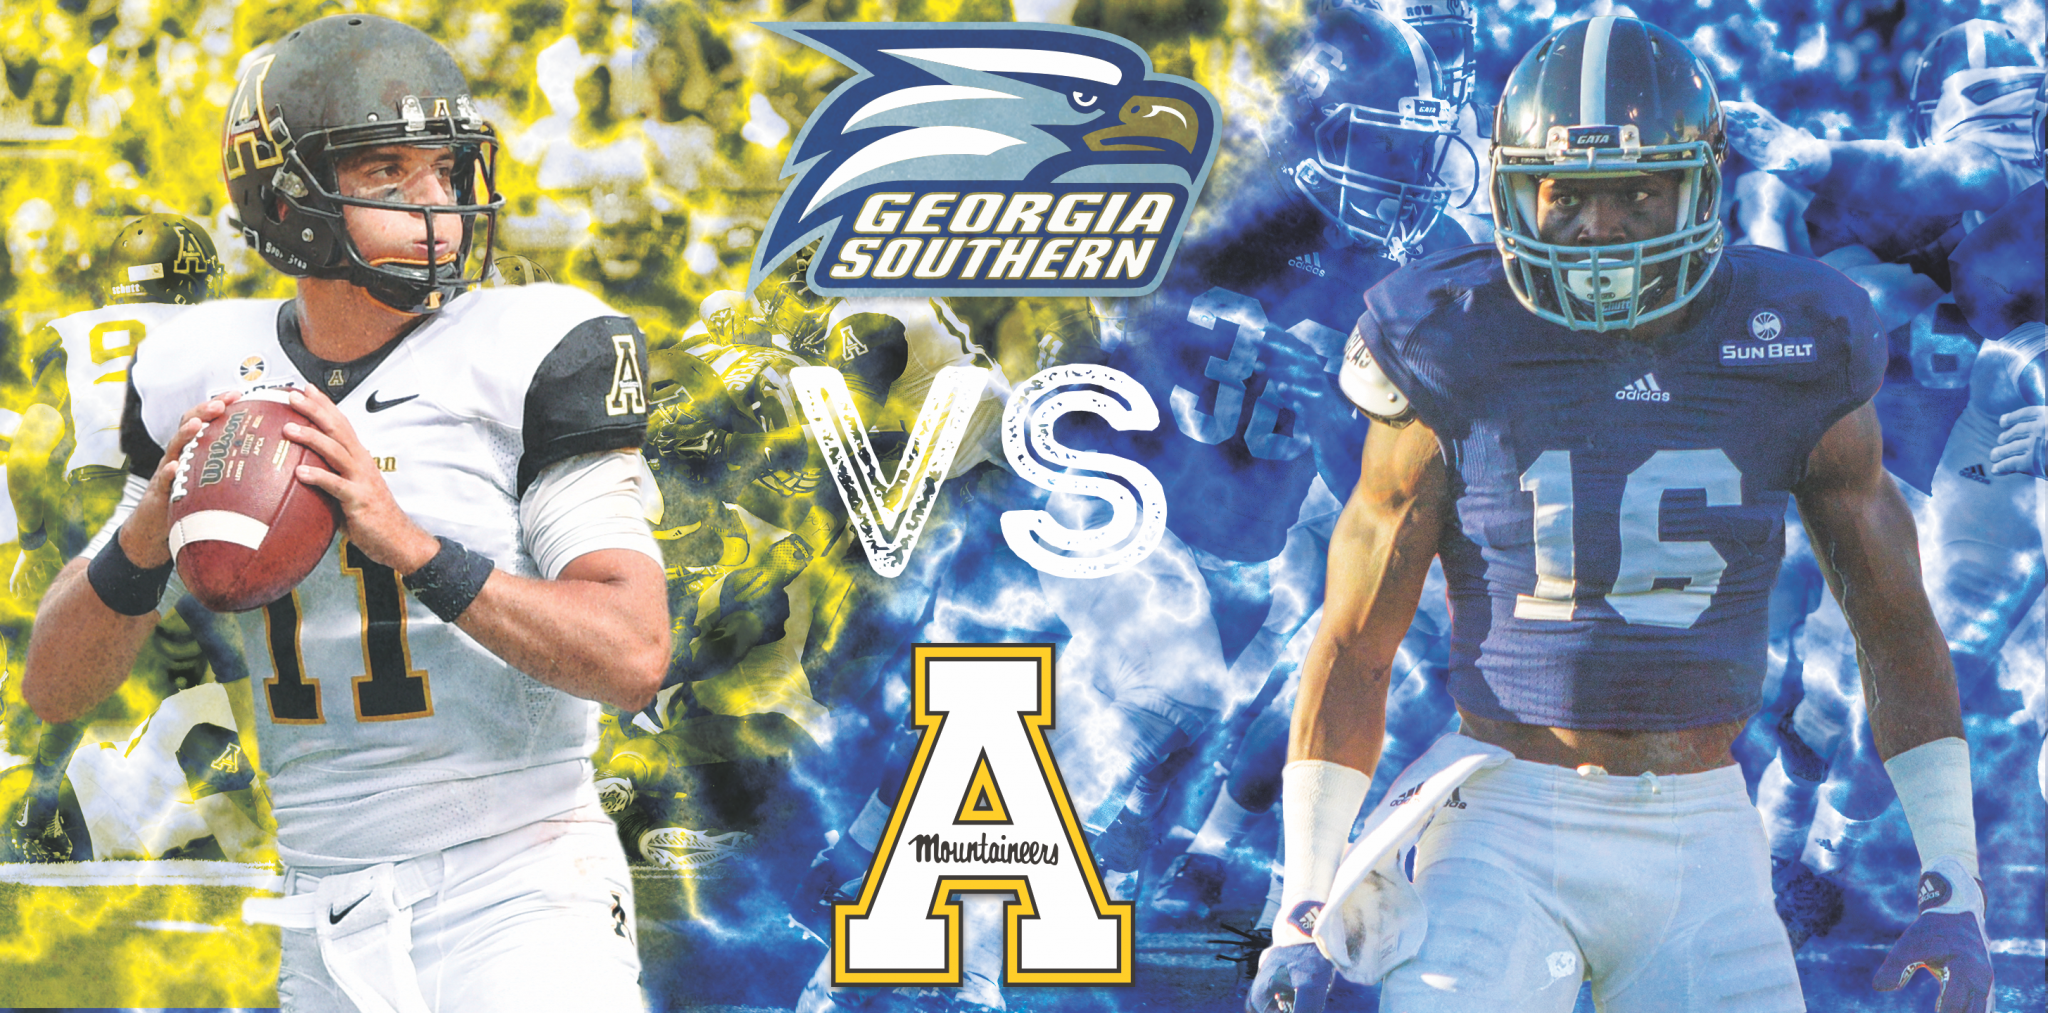 Head to Head: Why App State will top Georgia Southern